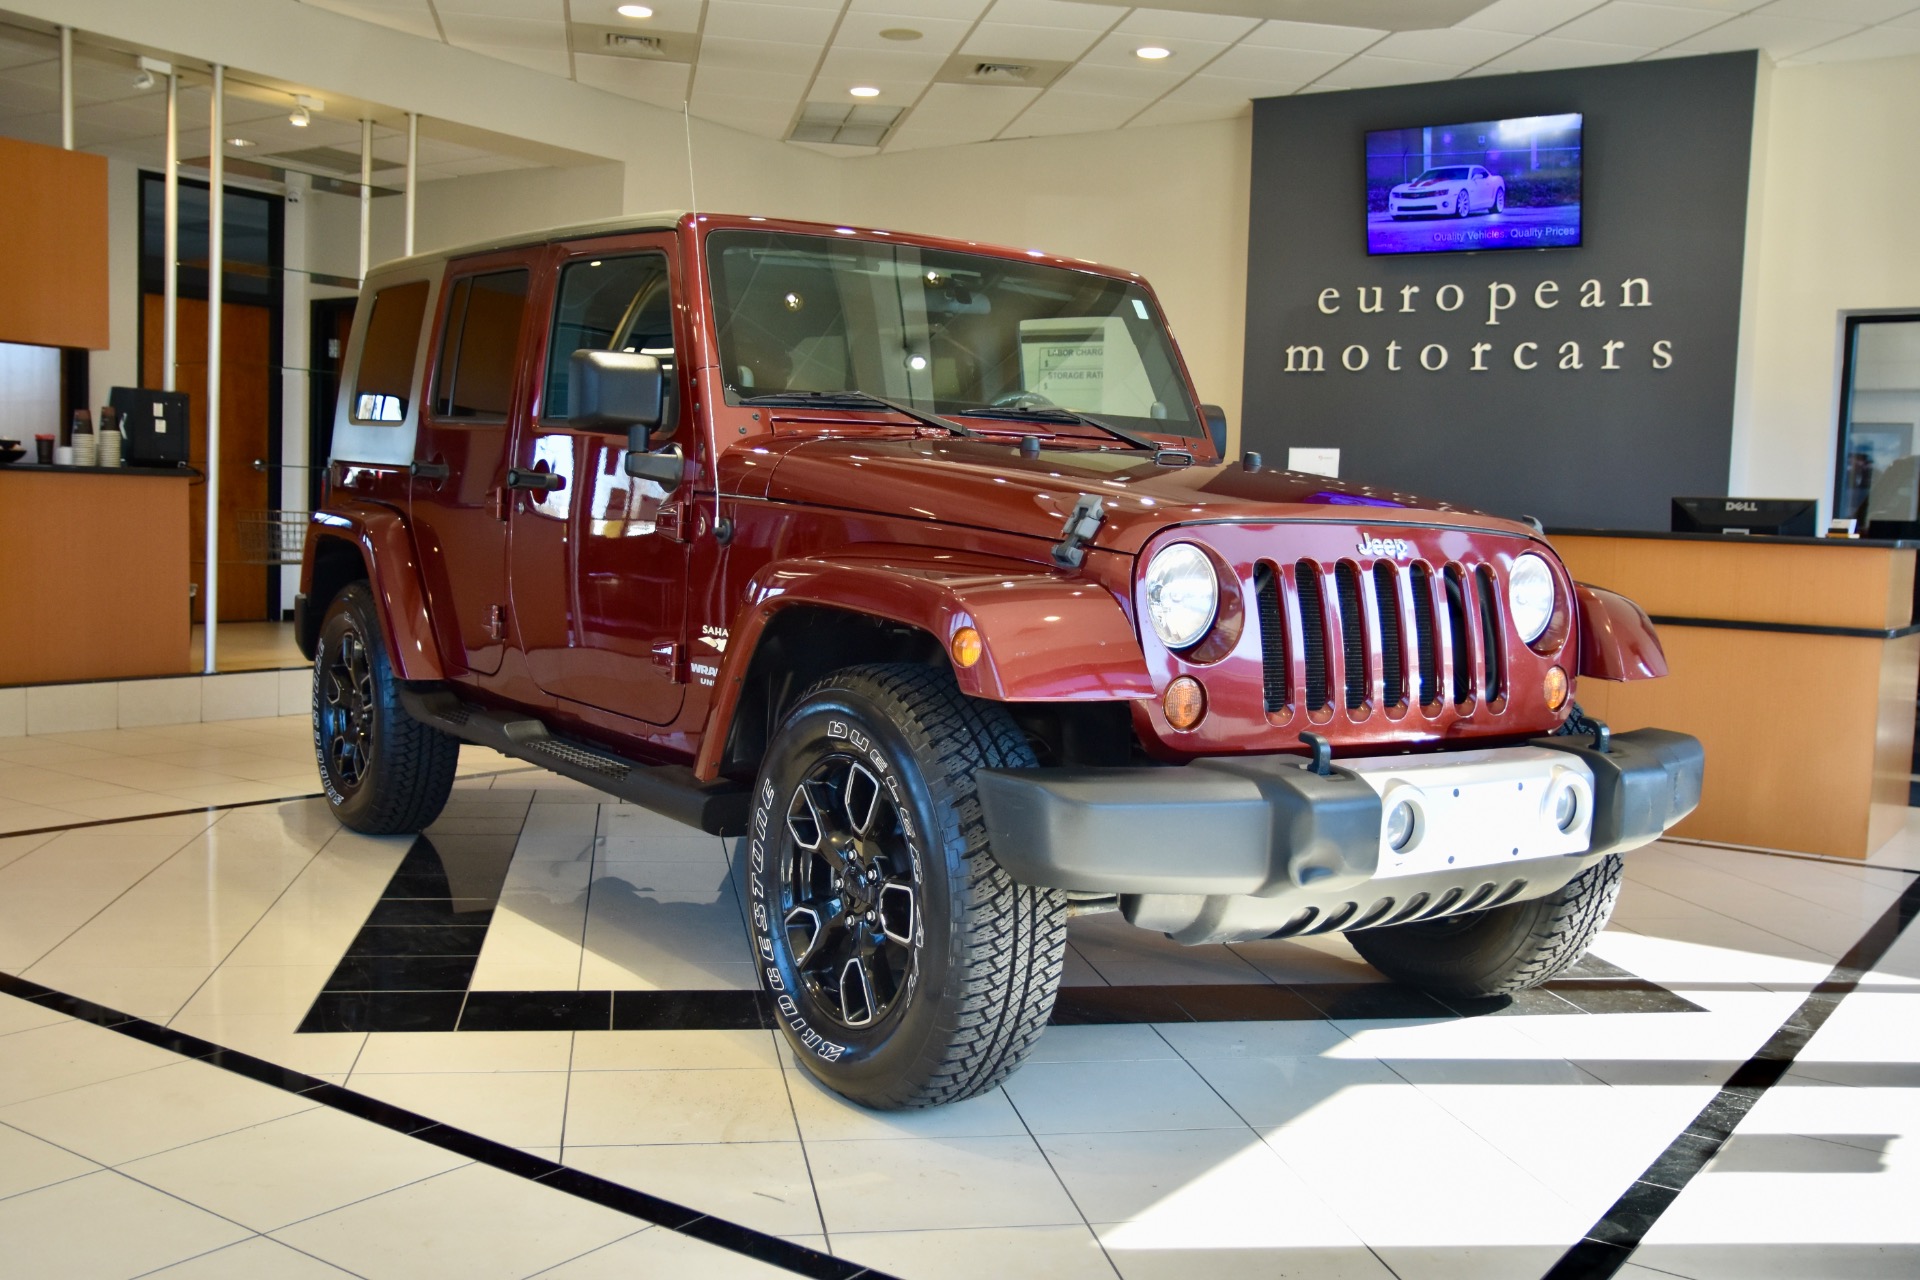 Used 2008 Jeep Wrangler Unlimited Sahara For Sale (Sold) | European  Motorcars Stock #639974